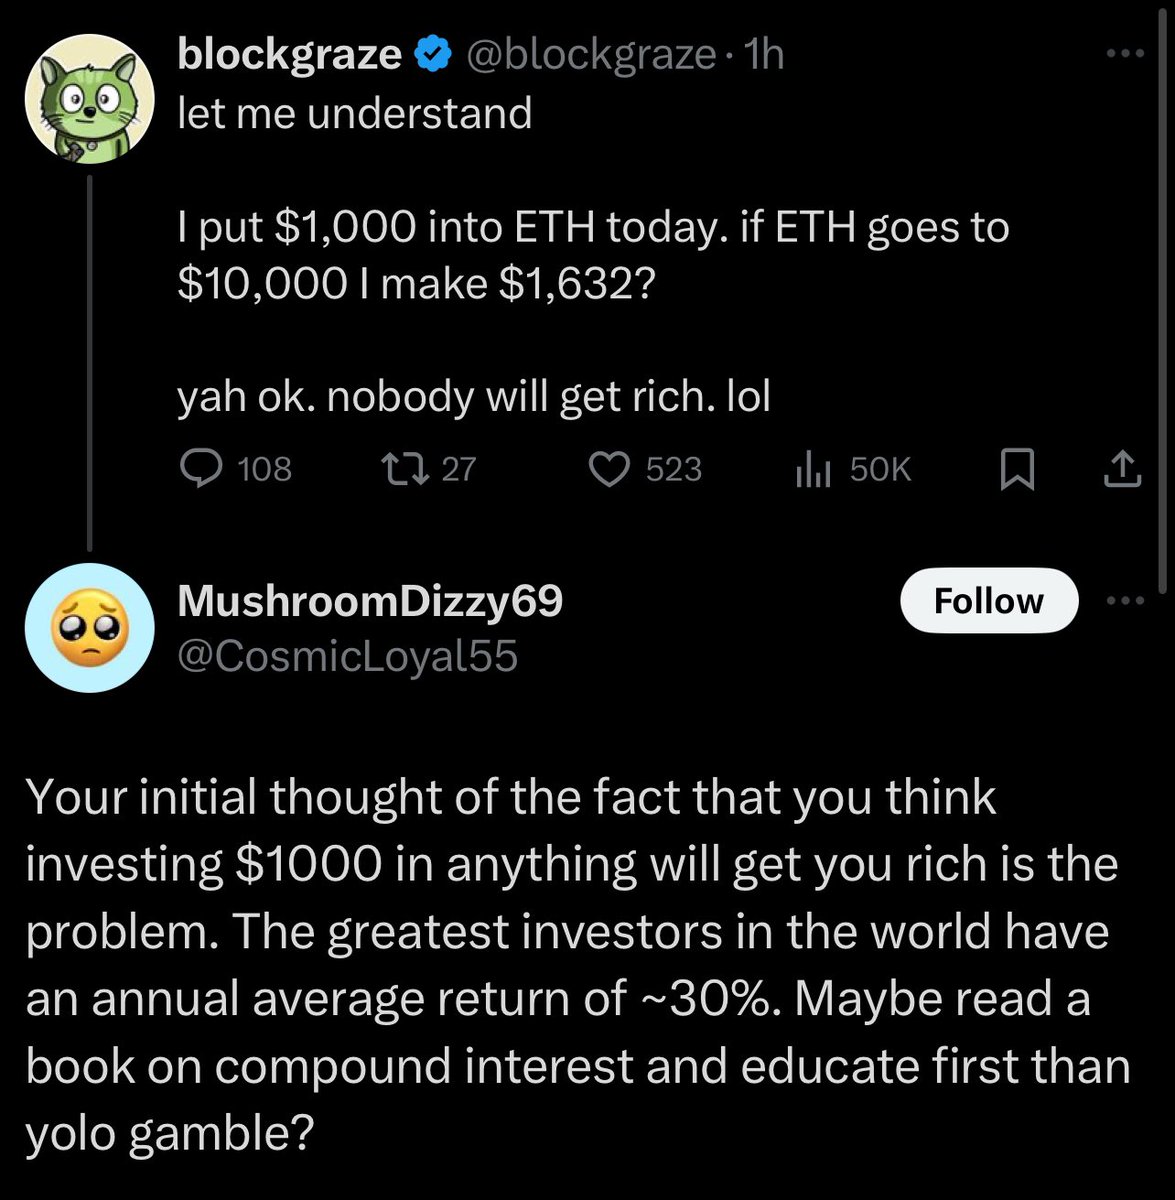 Generally I would agree with this reply, but in this hilariously specific instance, he decided to reply to the one guy that turned $1k into $5M in one trade